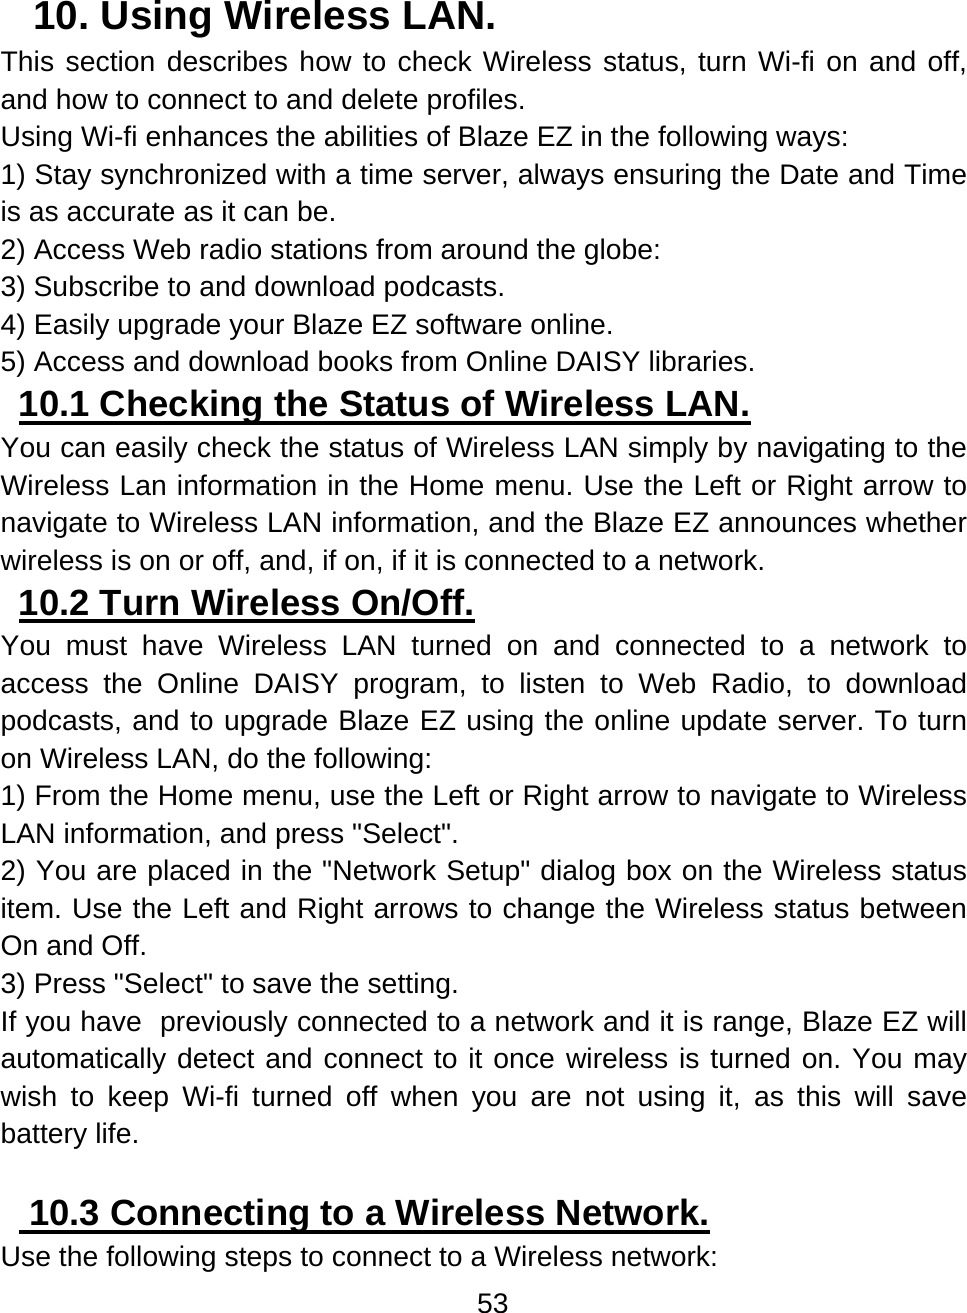 53  10. Using Wireless LAN.  This section describes how to check Wireless status, turn Wi-fi on and off, and how to connect to and delete profiles. Using Wi-fi enhances the abilities of Blaze EZ in the following ways: 1) Stay synchronized with a time server, always ensuring the Date and Time is as accurate as it can be. 2) Access Web radio stations from around the globe: 3) Subscribe to and download podcasts. 4) Easily upgrade your Blaze EZ software online. 5) Access and download books from Online DAISY libraries.  10.1 Checking the Status of Wireless LAN.  You can easily check the status of Wireless LAN simply by navigating to the Wireless Lan information in the Home menu. Use the Left or Right arrow to navigate to Wireless LAN information, and the Blaze EZ announces whether wireless is on or off, and, if on, if it is connected to a network.    10.2 Turn Wireless On/Off.  You must have Wireless LAN turned on and connected to a network to access the Online DAISY program, to listen to Web Radio, to download podcasts, and to upgrade Blaze EZ using the online update server. To turn on Wireless LAN, do the following: 1) From the Home menu, use the Left or Right arrow to navigate to Wireless LAN information, and press &quot;Select&quot;. 2) You are placed in the &quot;Network Setup&quot; dialog box on the Wireless status item. Use the Left and Right arrows to change the Wireless status between On and Off. 3) Press &quot;Select&quot; to save the setting. If you have  previously connected to a network and it is range, Blaze EZ will automatically detect and connect to it once wireless is turned on. You may wish to keep Wi-fi turned off when you are not using it, as this will save battery life.   10.3 Connecting to a Wireless Network.  Use the following steps to connect to a Wireless network: 